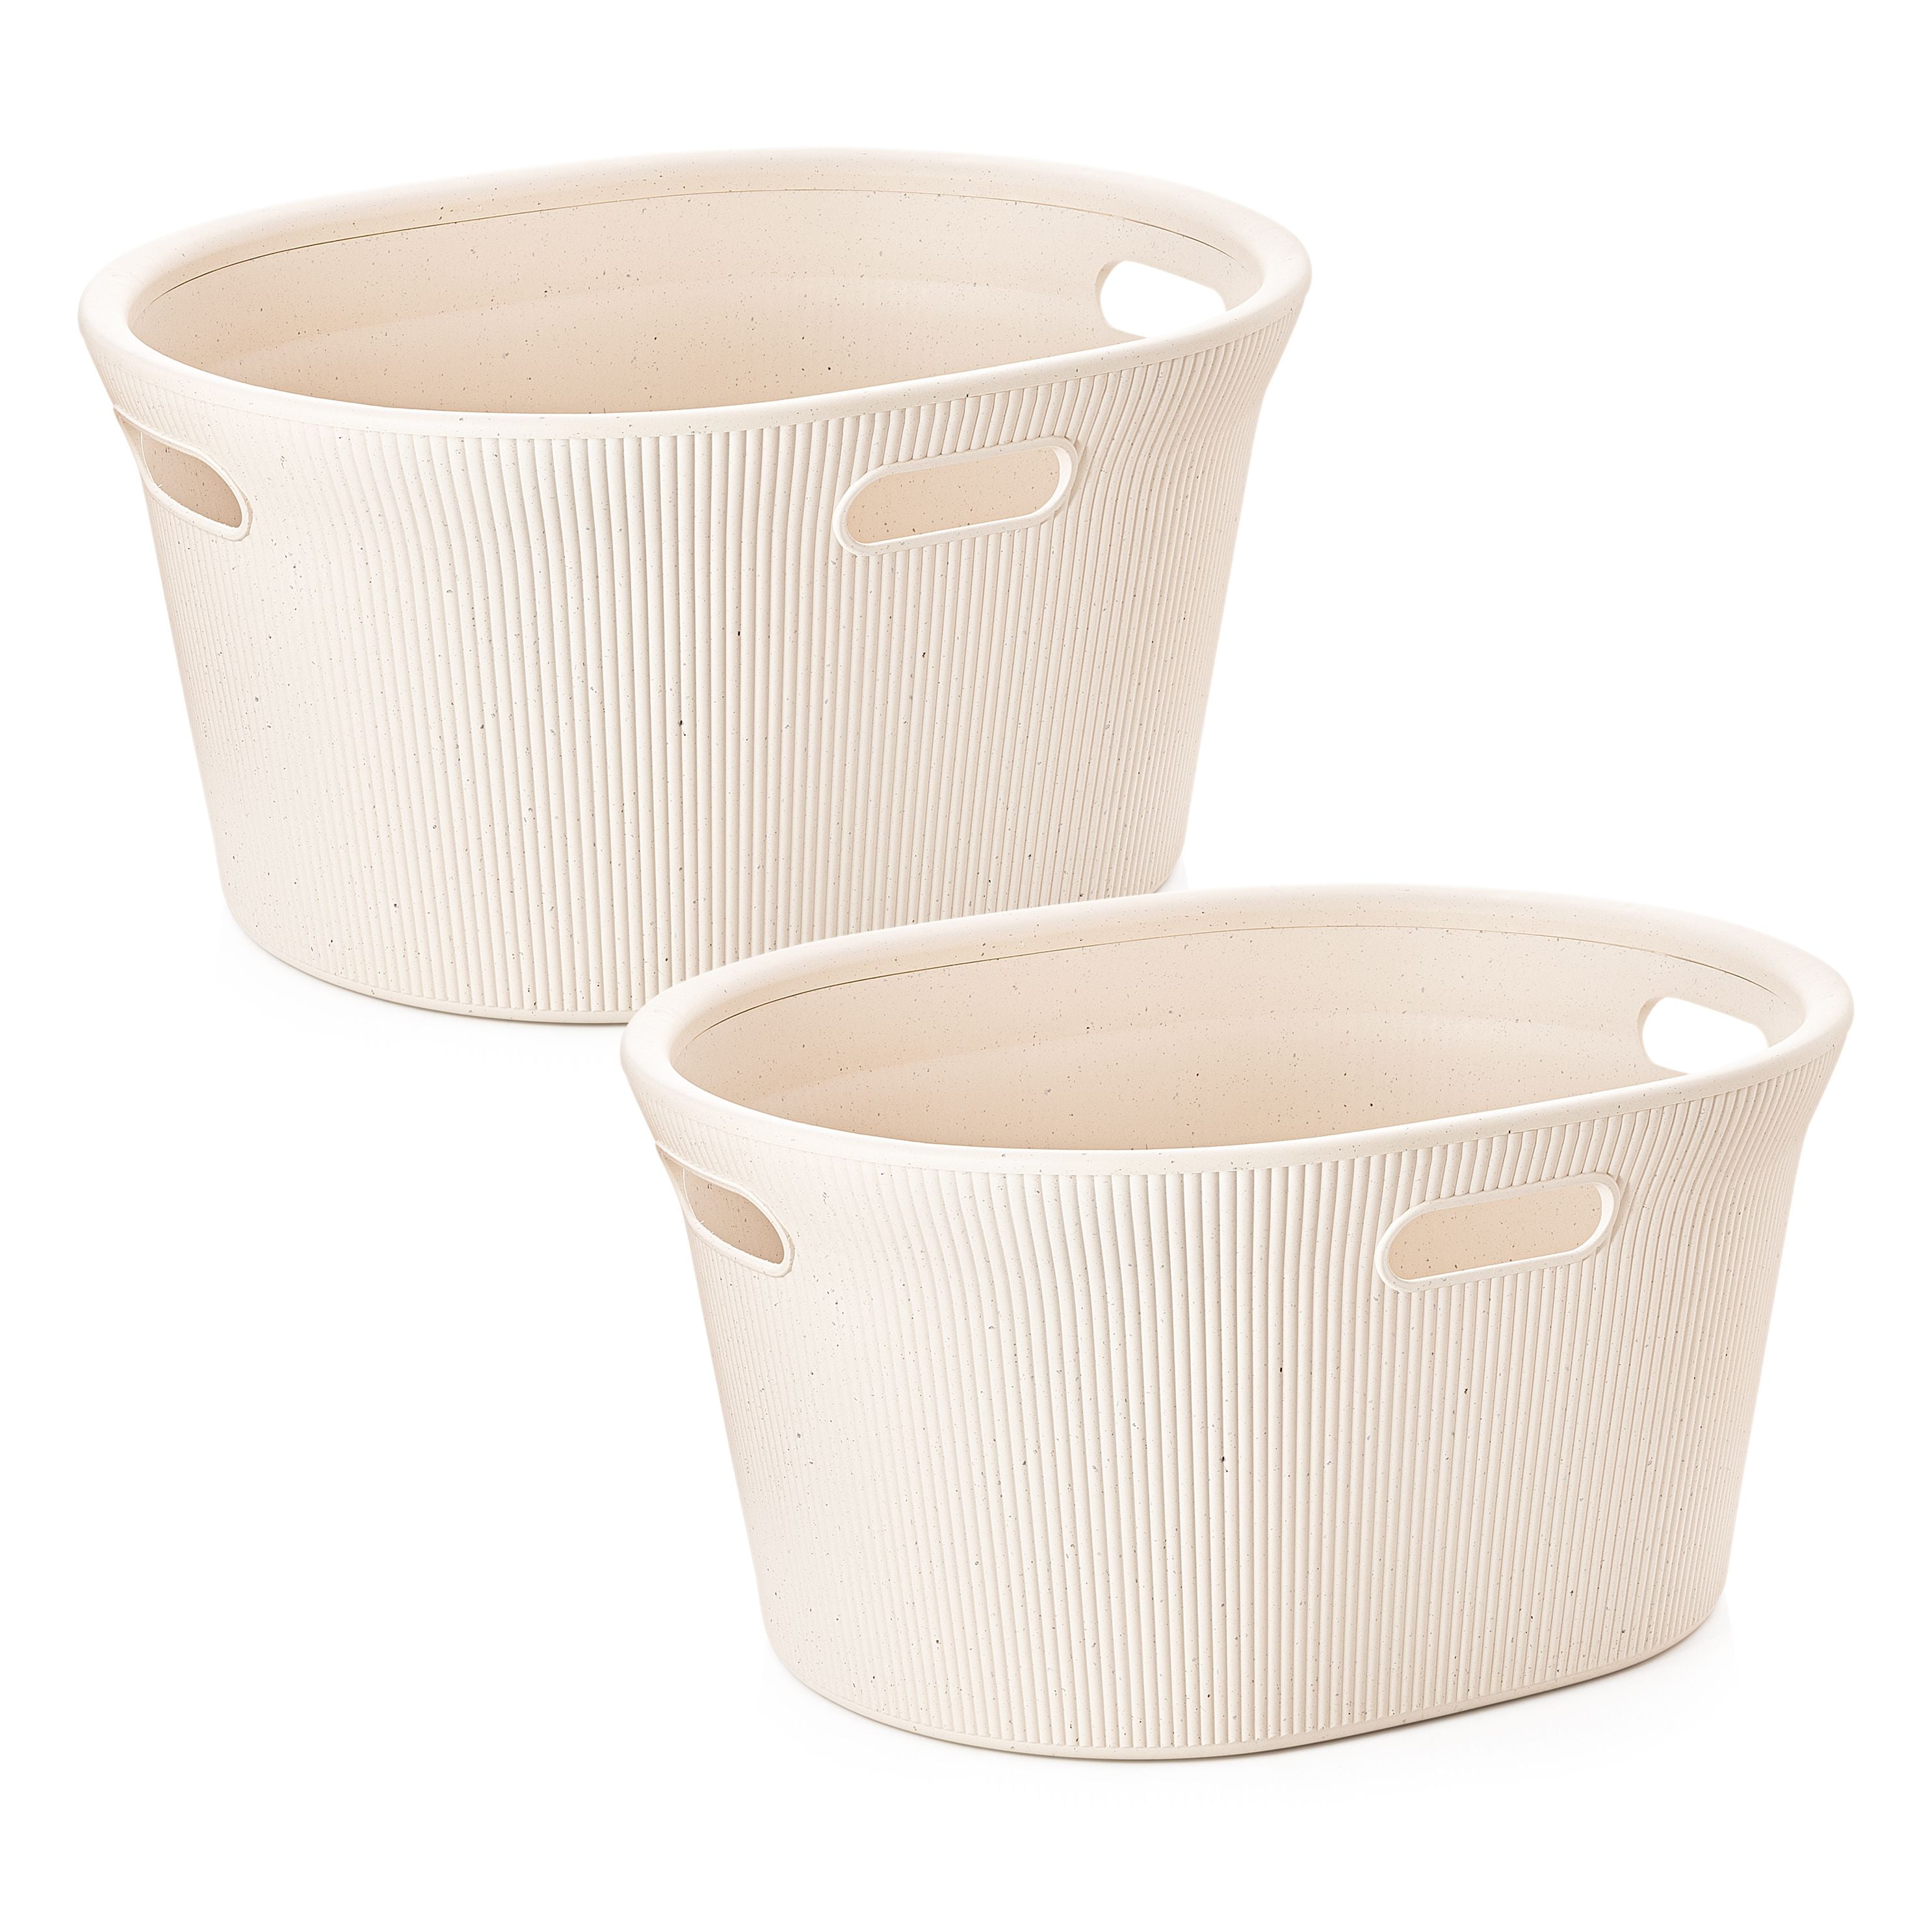 Superio Ribbed Collection - Decorative Plastic Lidded Home Storage Bins  Organizer Baskets, Medium Taupe (2 Pack - 5 Liter) Stackable Container Box